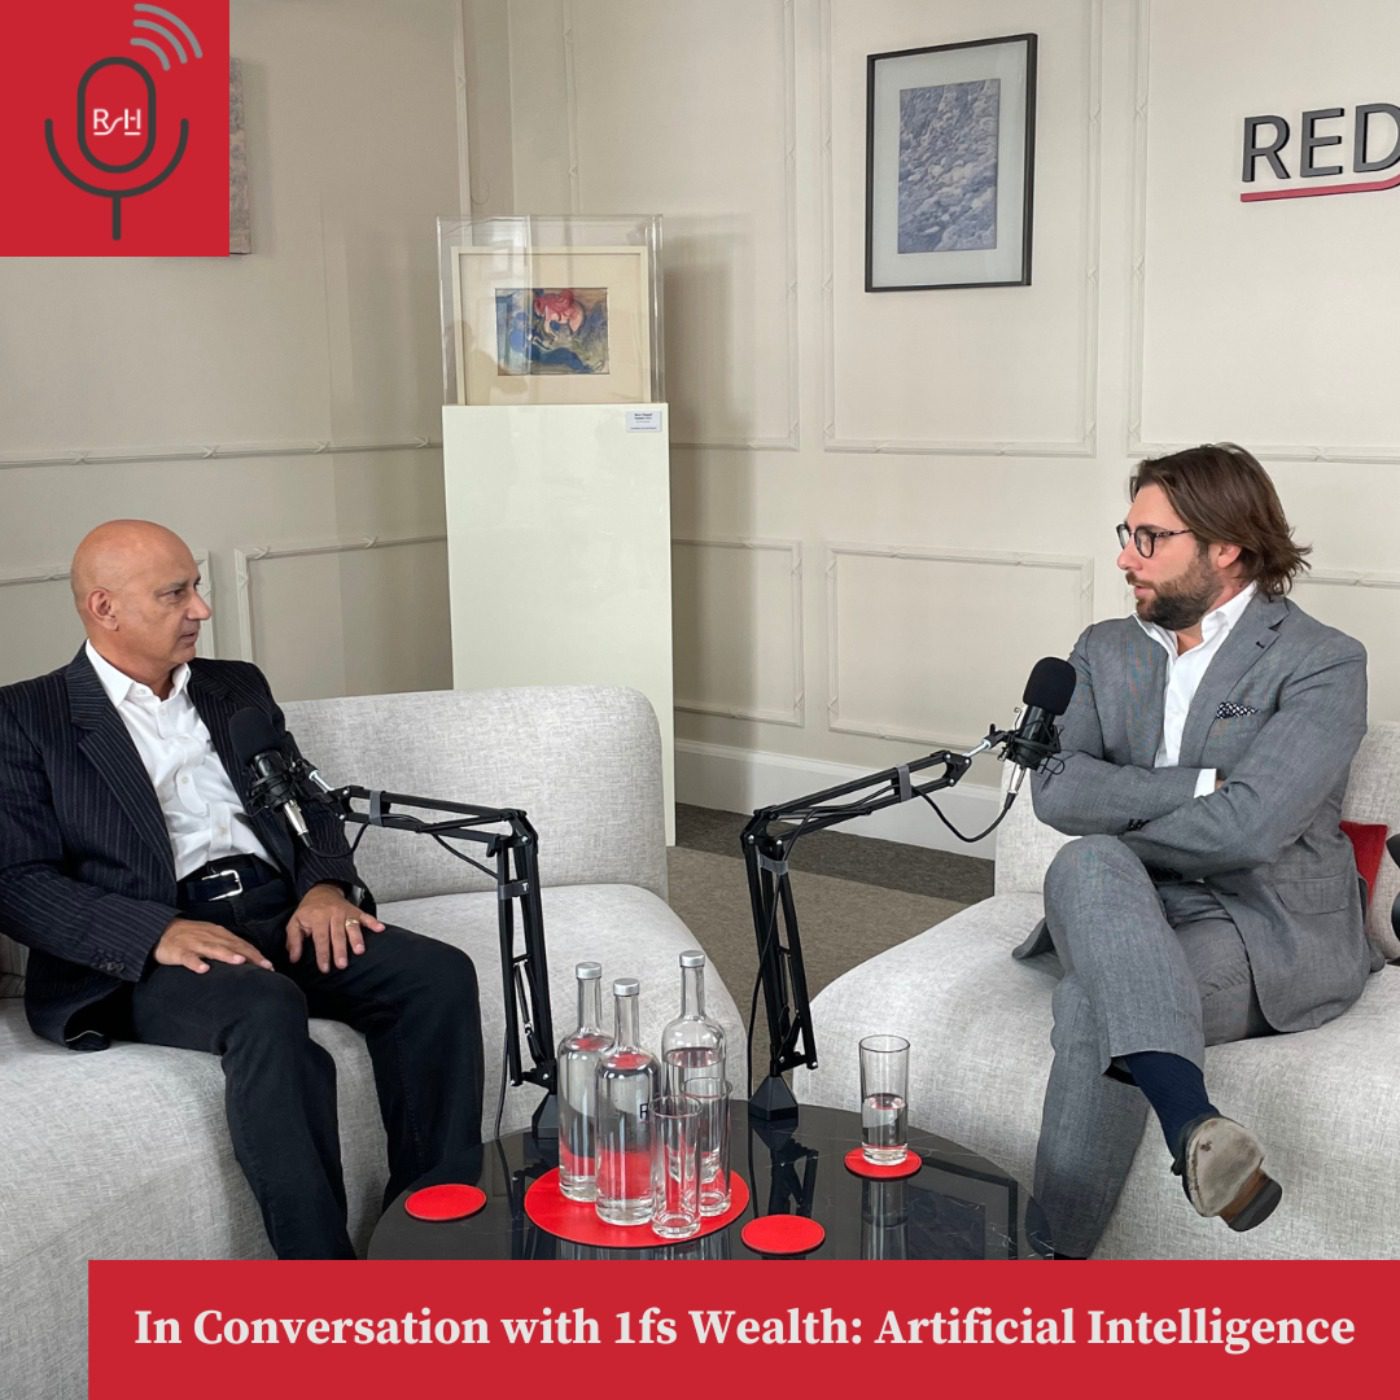 In Conversation with 1fs Wealth: Artificial Intelligence